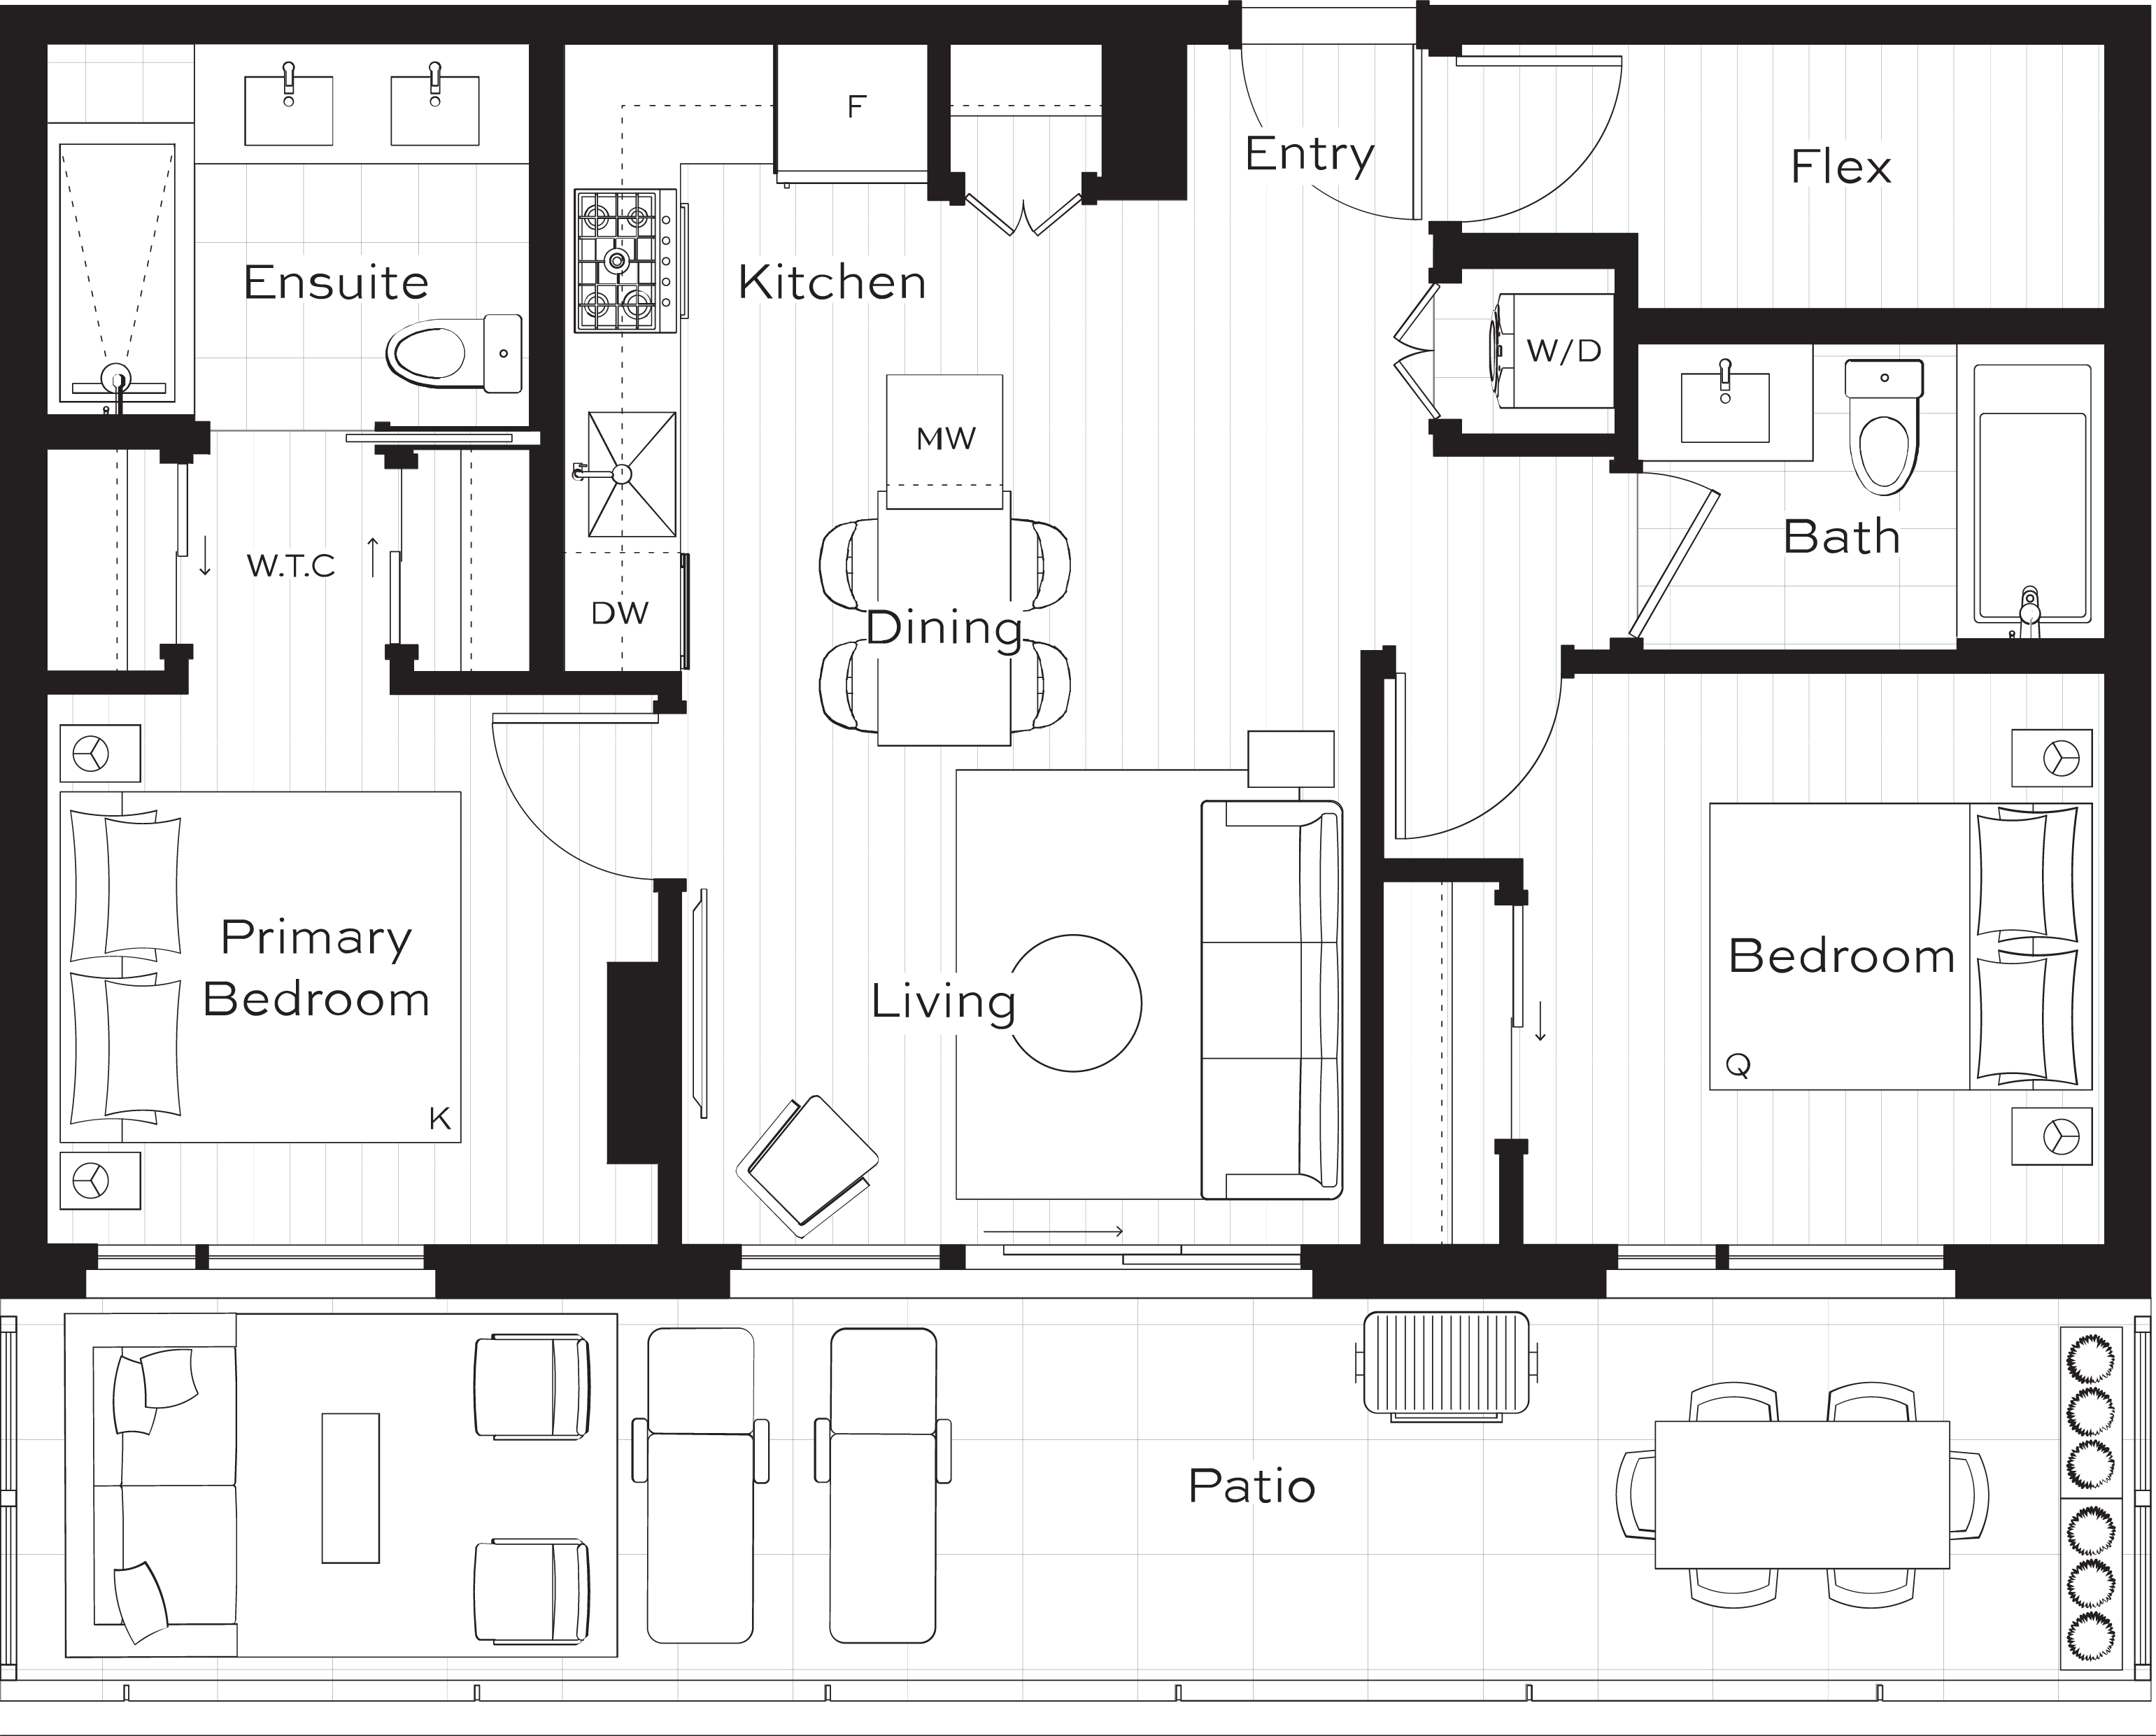  C7 (504)  Floor Plan of Lina at QE Park Condos with undefined beds